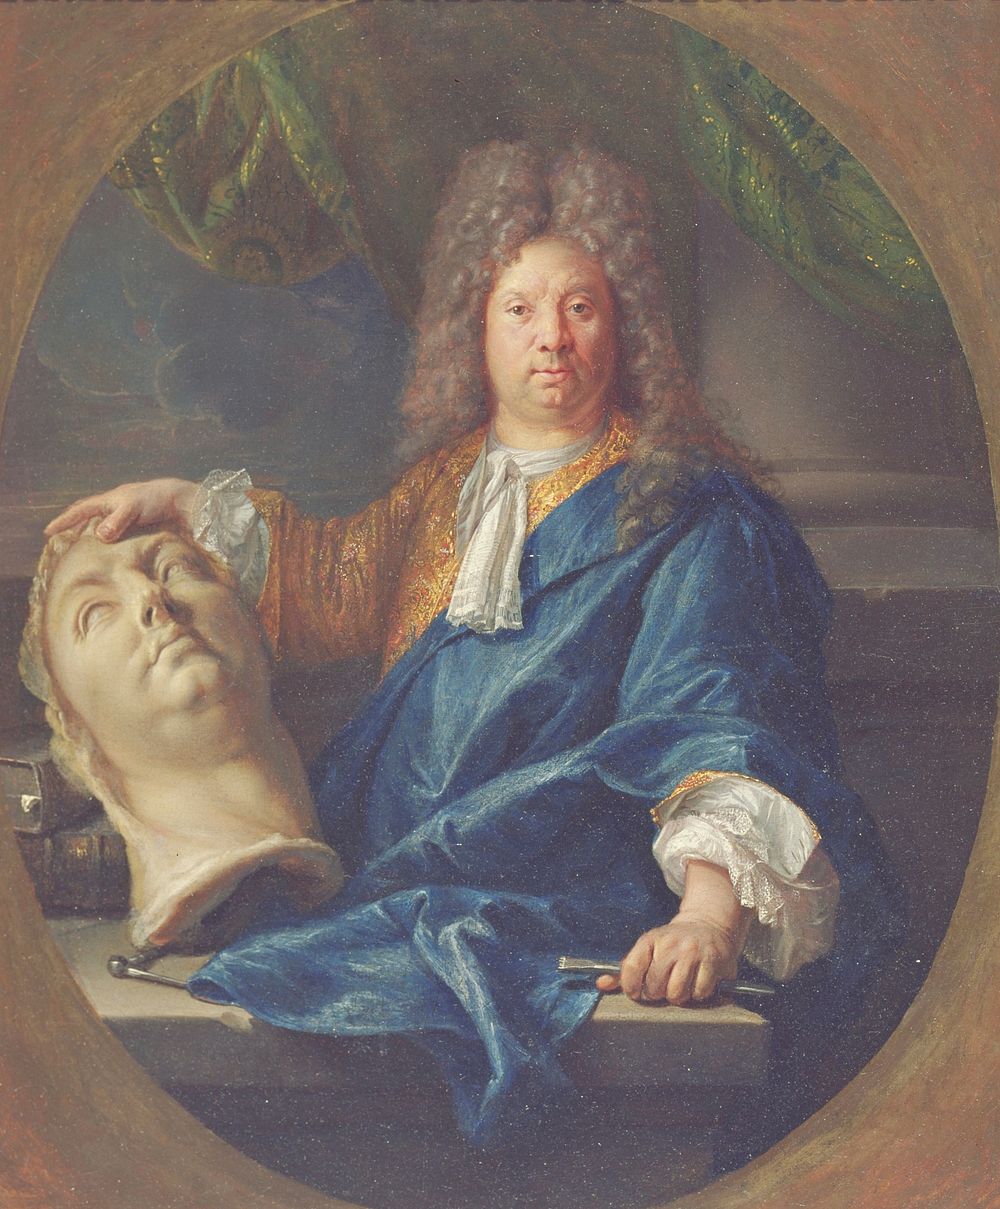 Antoine Coysevox (1640-1720), a sculptor employed by Louis XIV. Original from the Minneapolis Institute of Art.